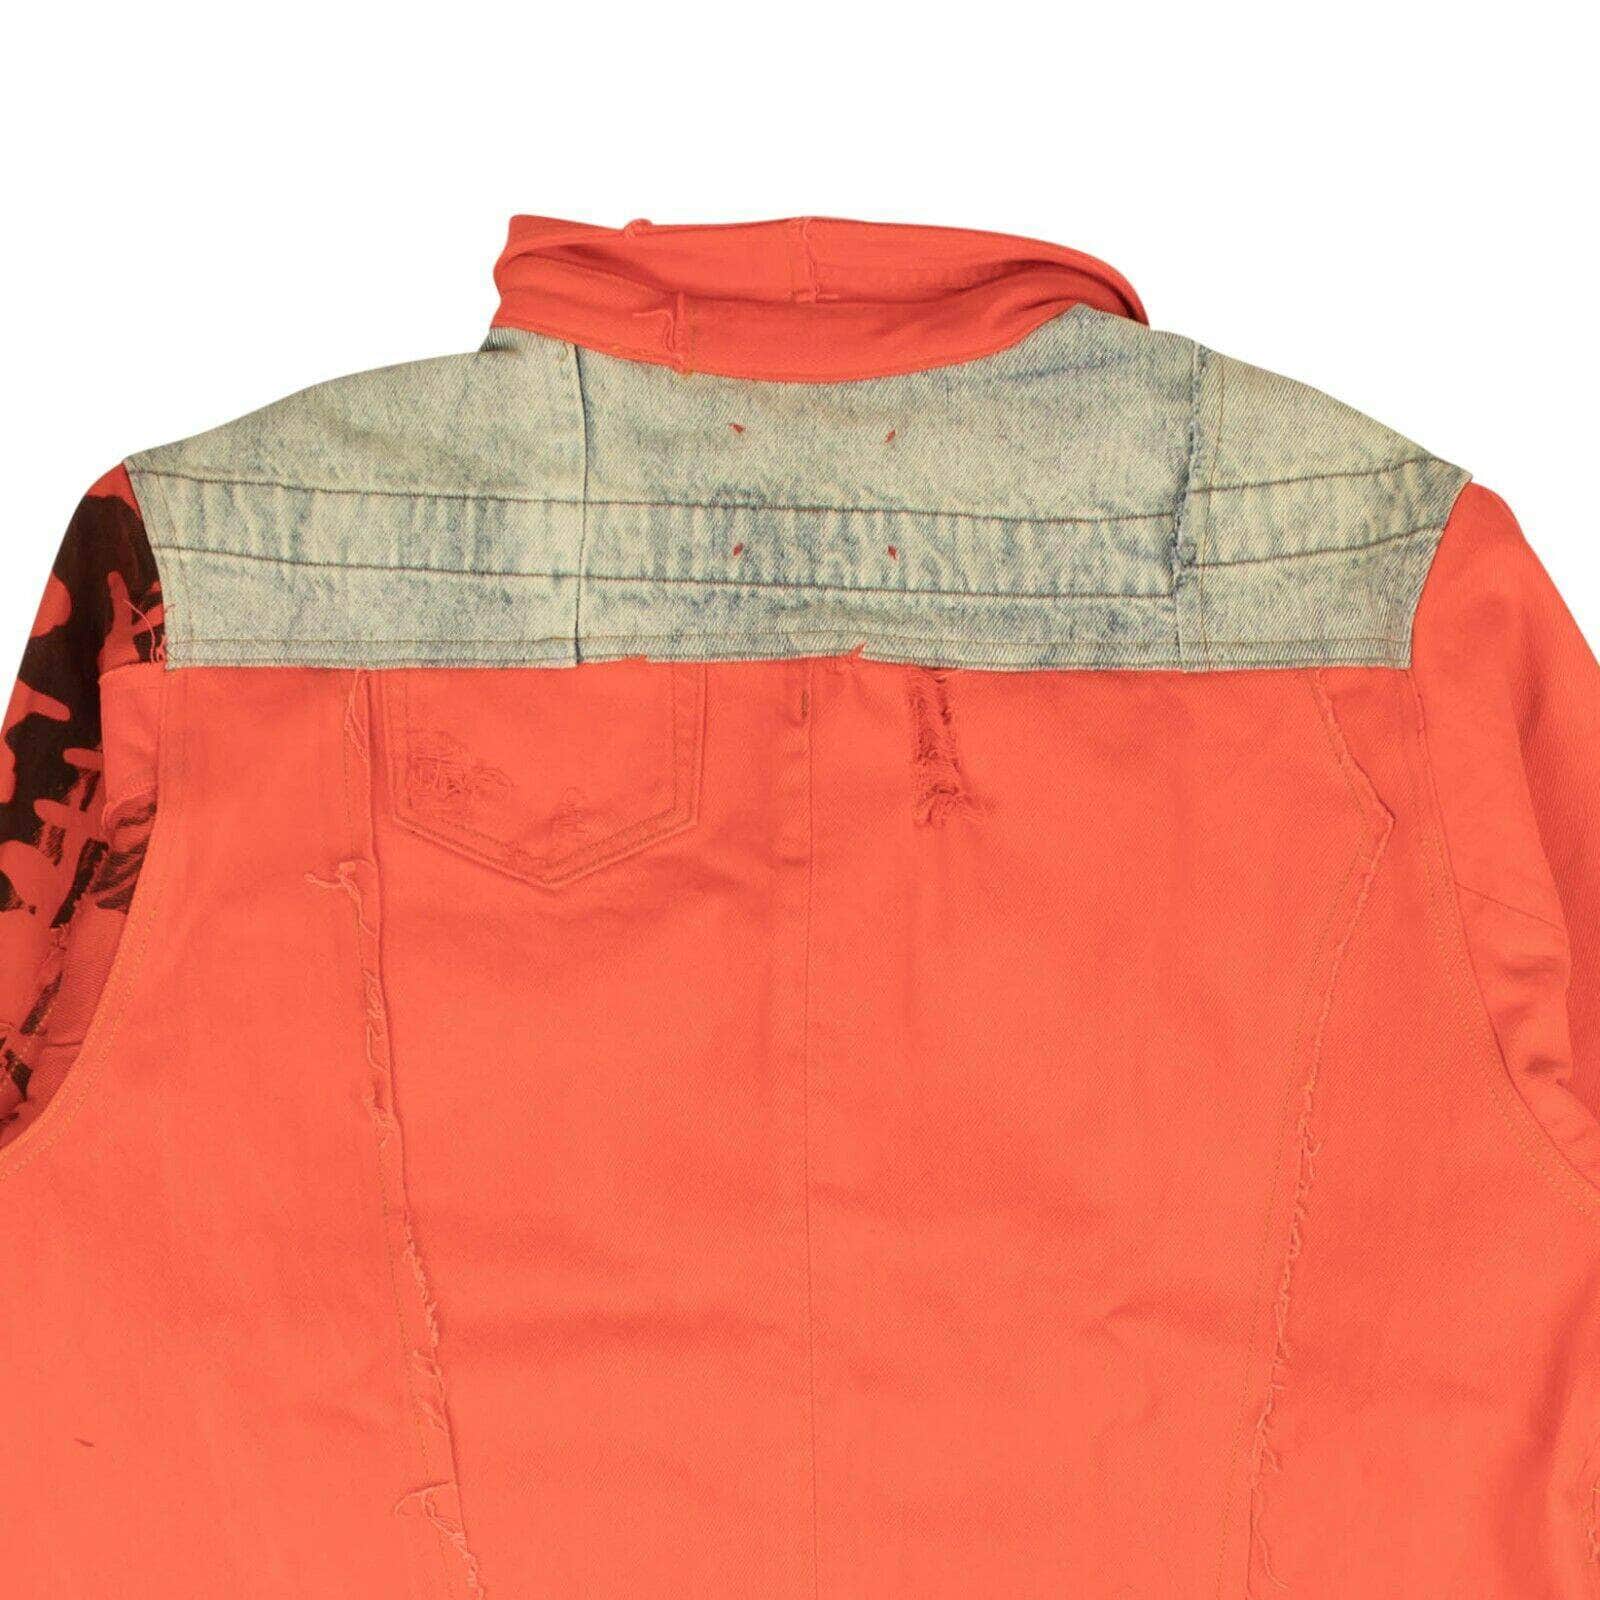 424 ON FAIRFAX 250-500, 424-on-fairfax, channelenable-all, chicmi, couponcollection, gender-mens, main-clothing, mens-shoes, size-l, size-m, size-s, size-xl Orange And Blue Reworked Work Button Down Shirt